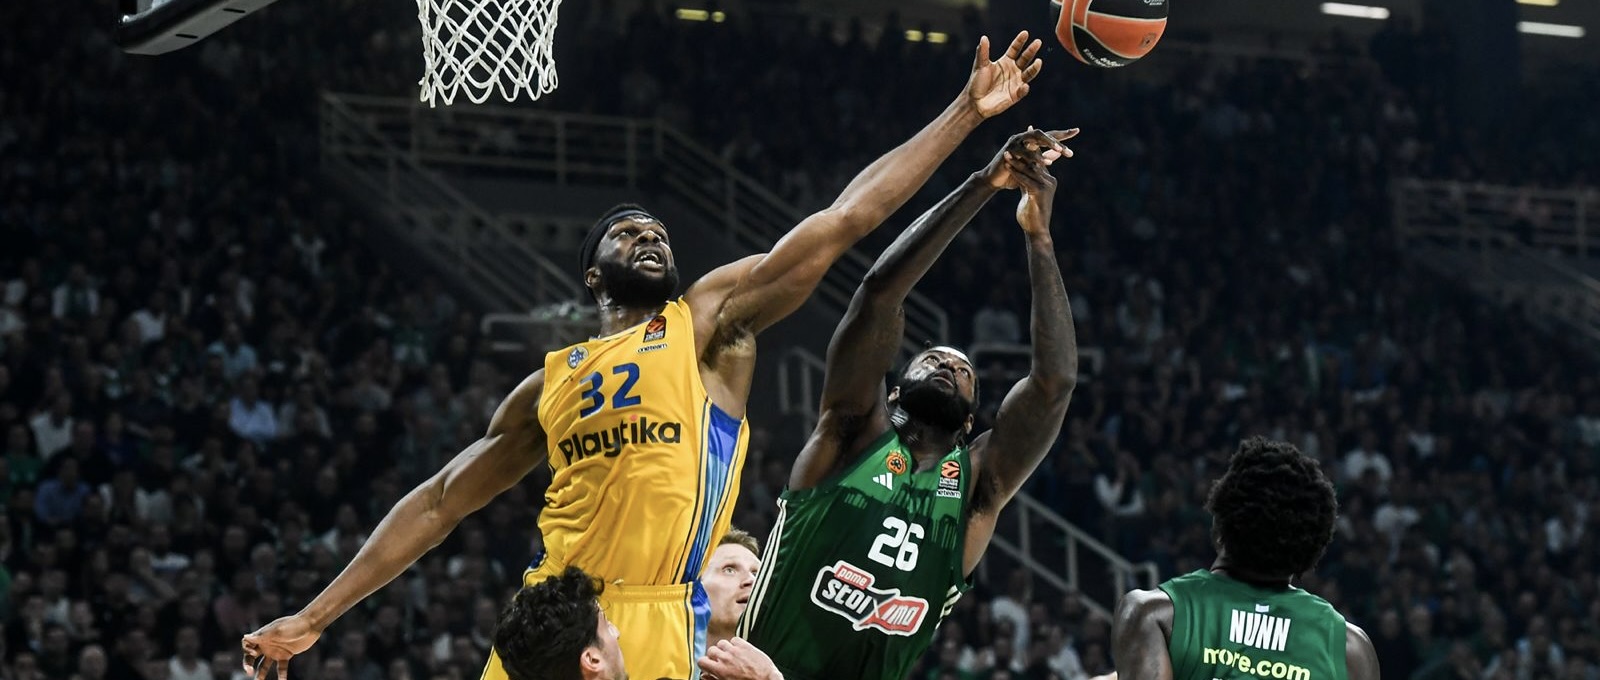 Can Maccabi Tel Aviv make it to the promised land after rough and tumble Panathinaikos atmosphere takes hold of series